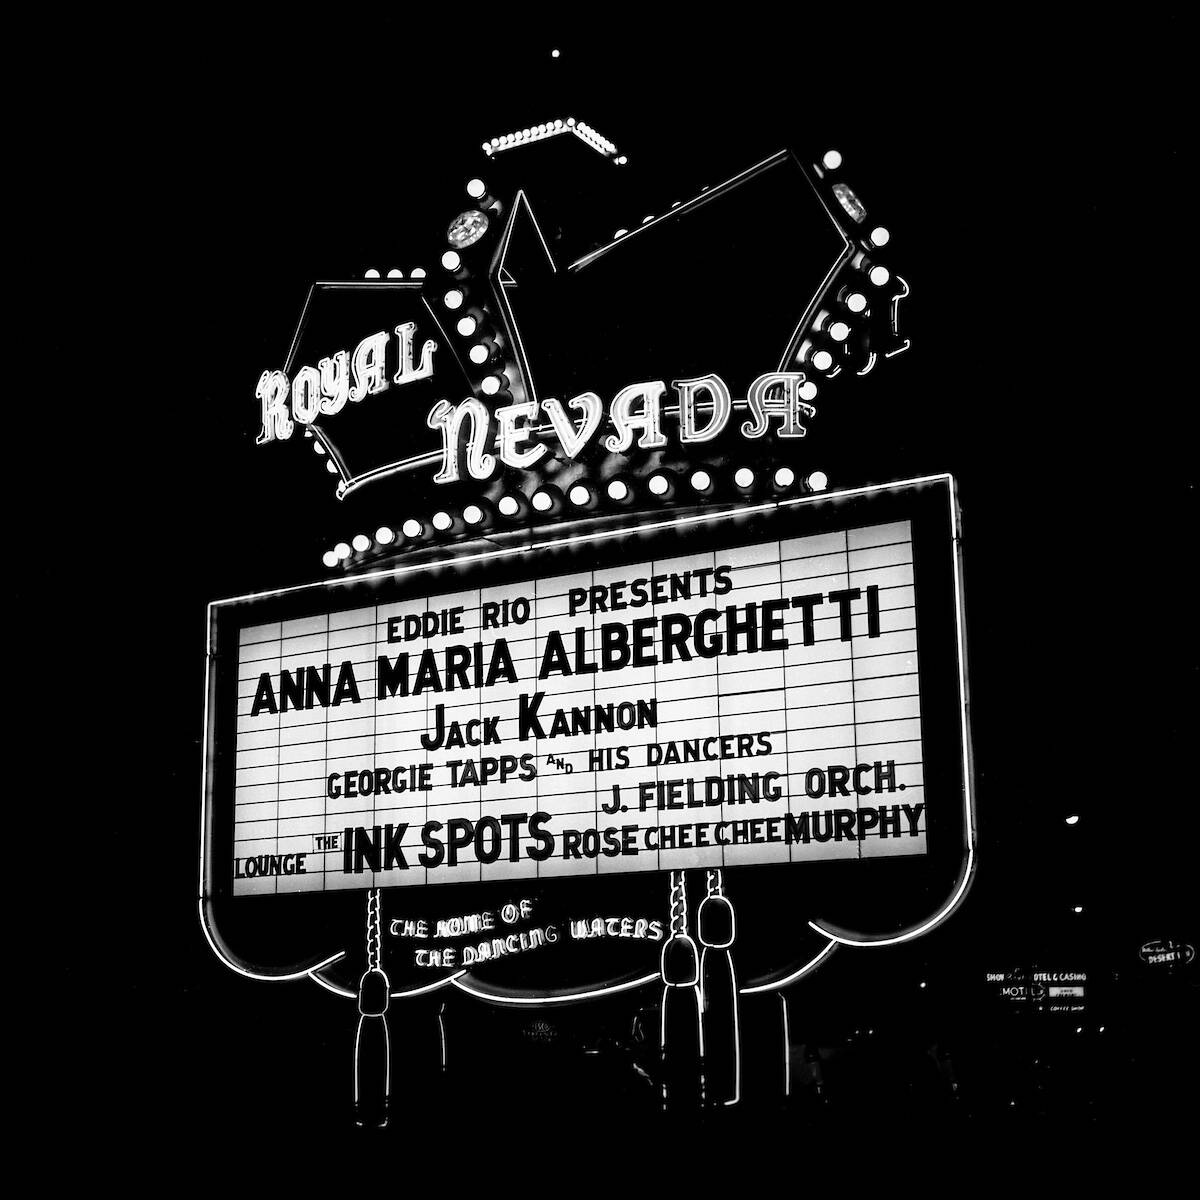 Anna Maria Alberghetti is the featured performer at the Royal Nevada on Dec. 31, 1955. (Las Veg ...